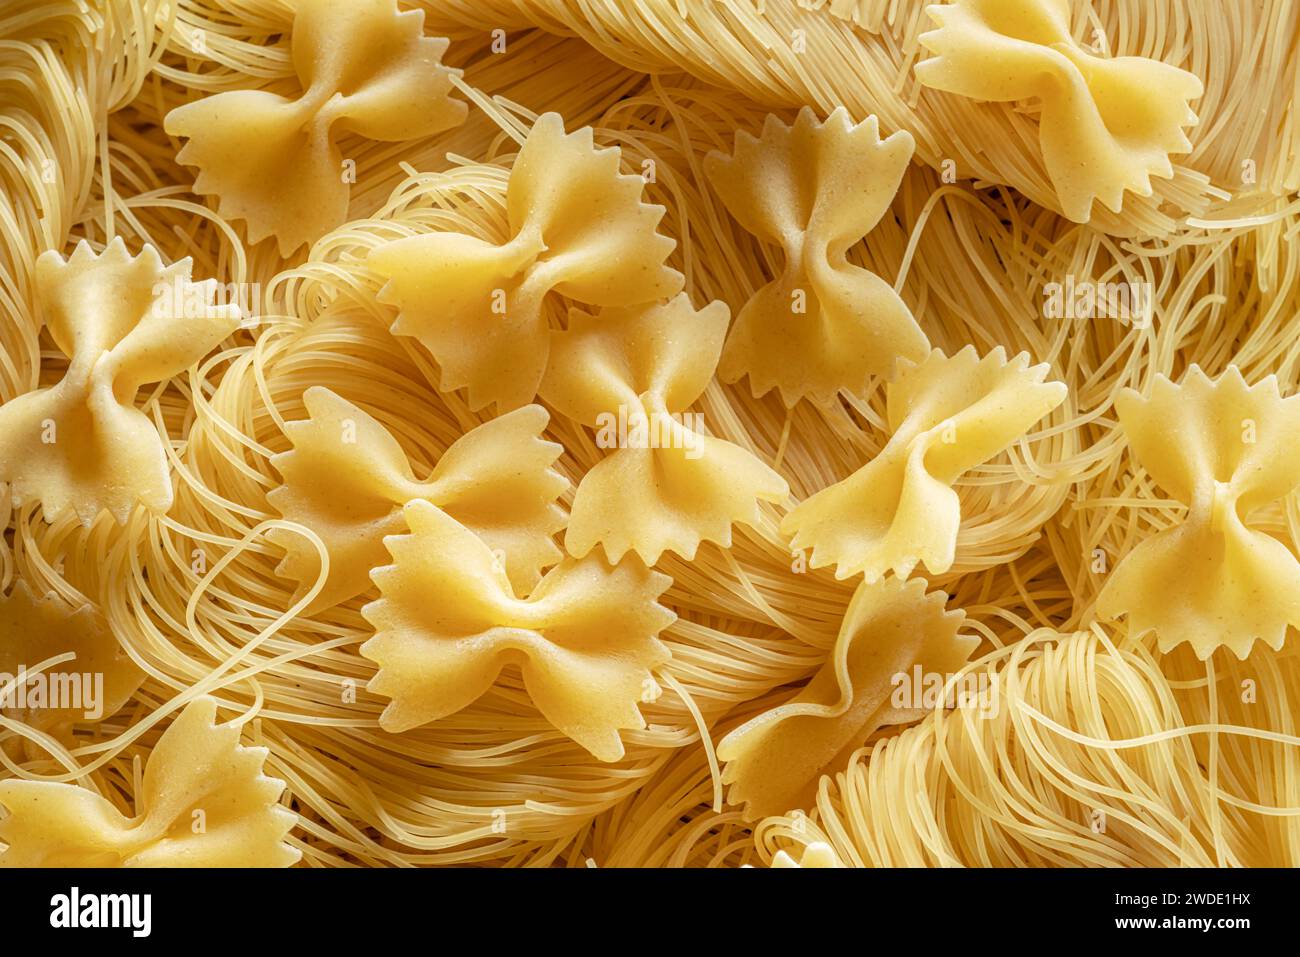 Italian pasta farfalle and vermicelli close-up. Food background. Stock Photo